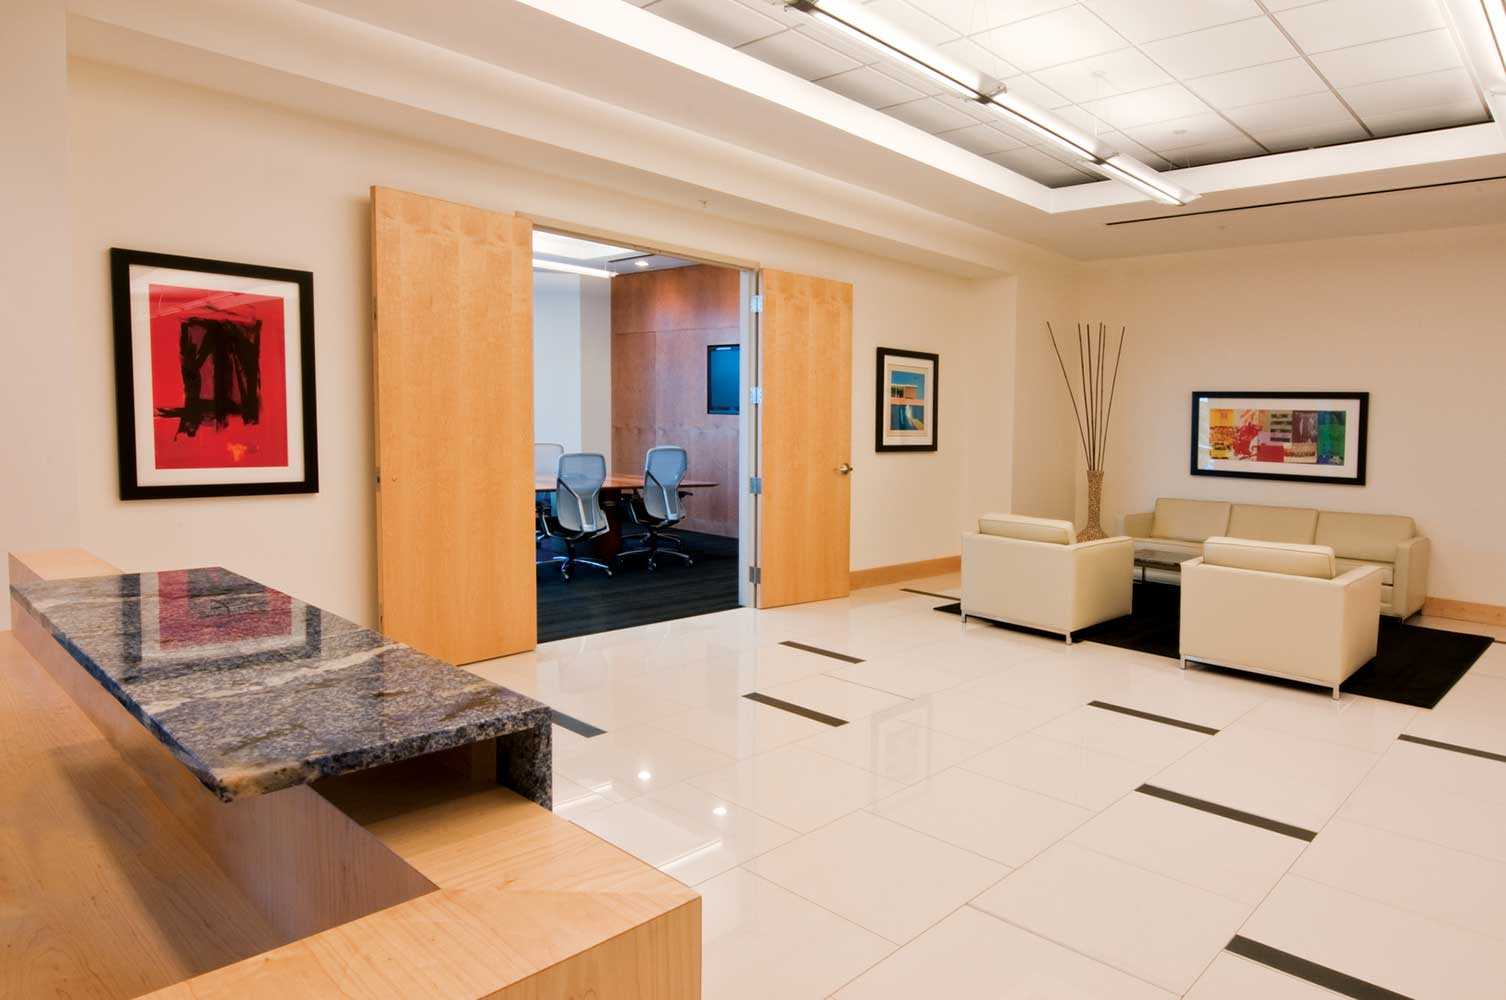 Reception area at BRPH with white floor and beige couch/chairs